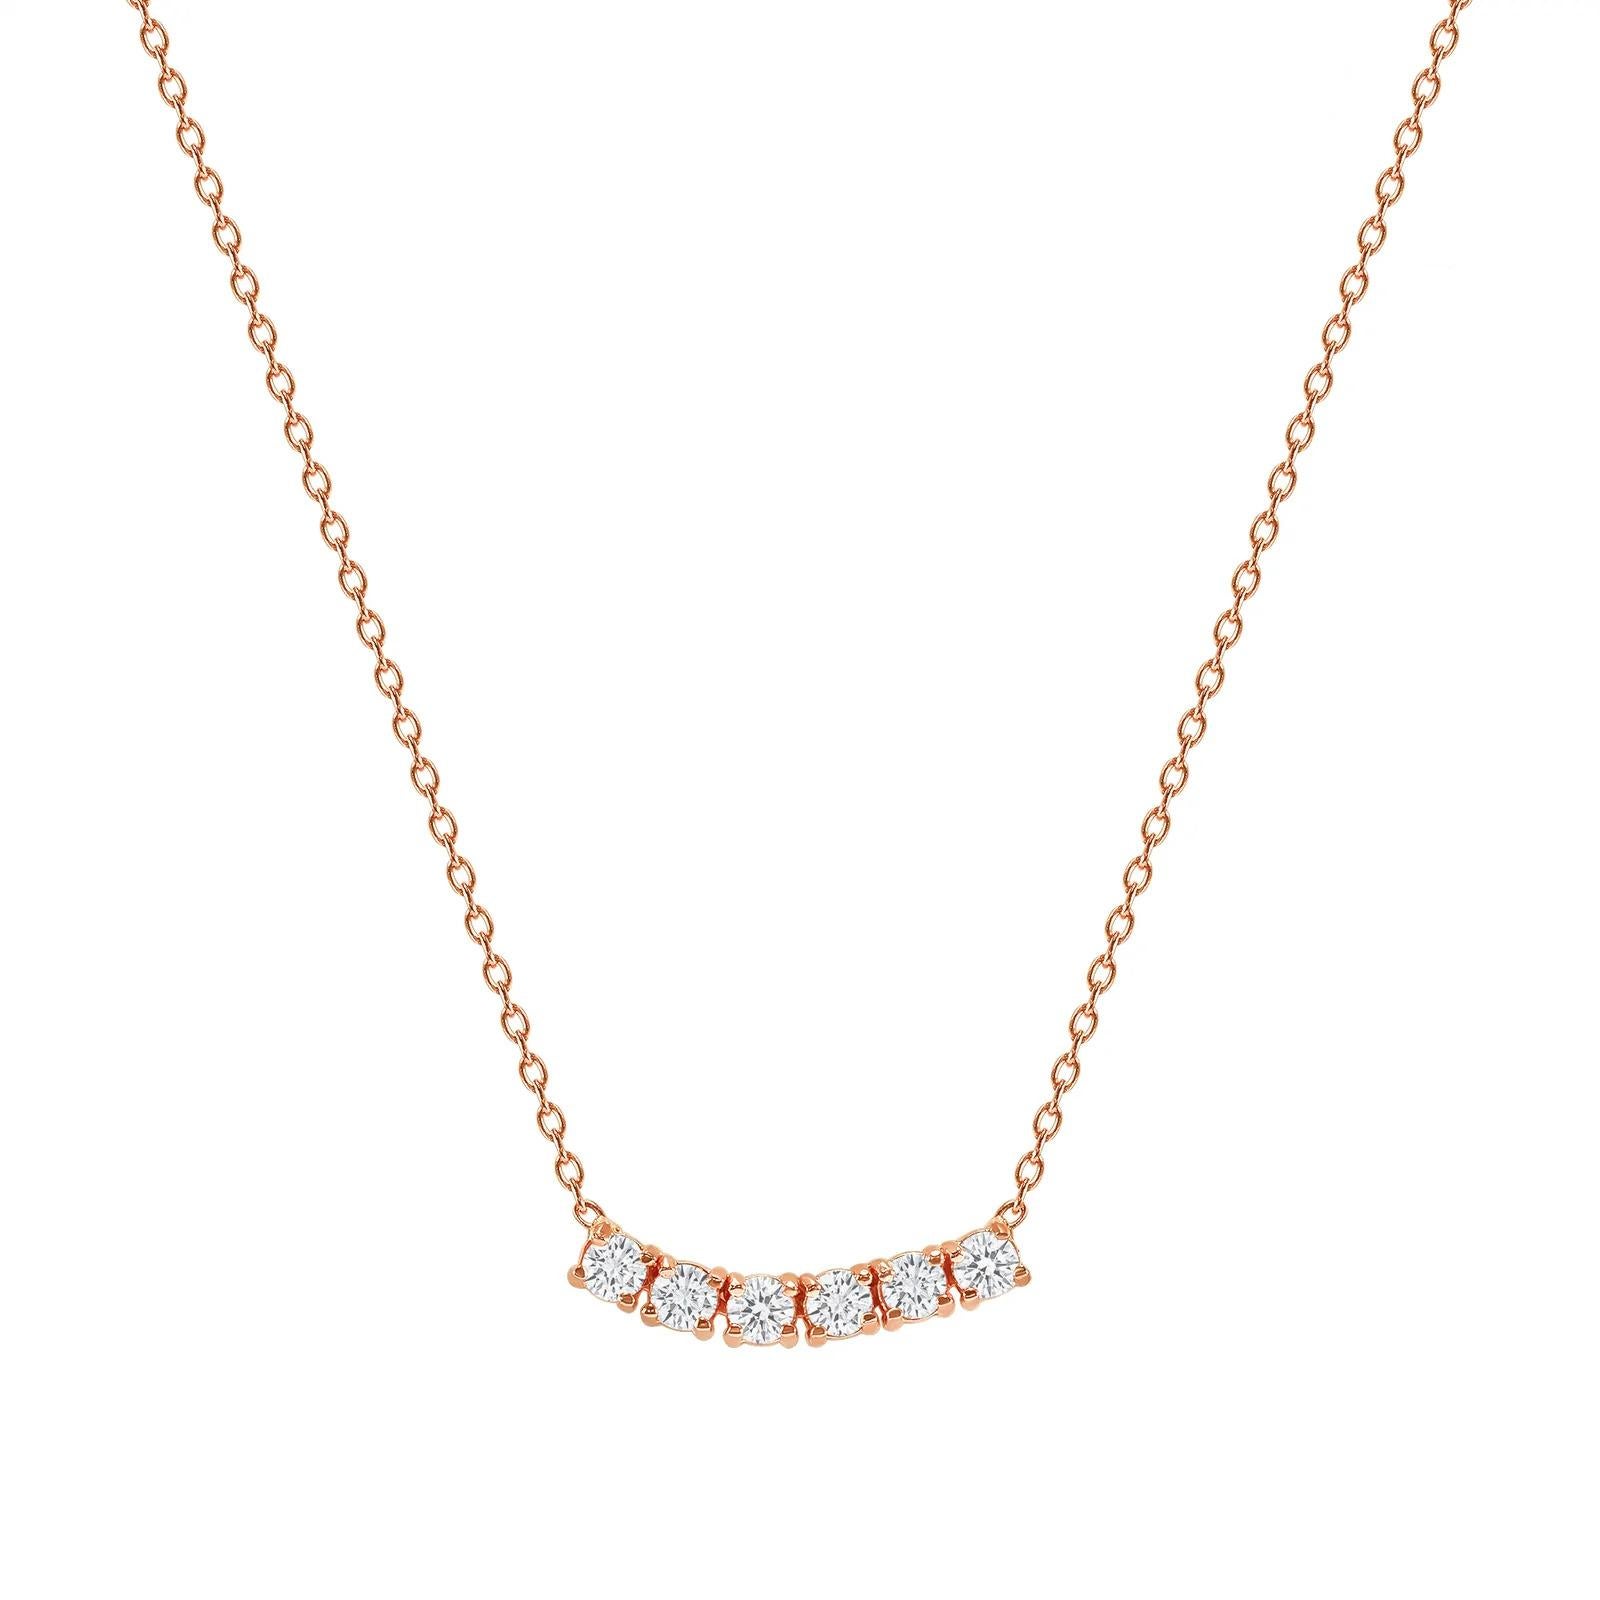 This petite, curved diamond necklace is crafted with gorgeous 14k gold set with six round diamonds.  

Gold: 14k 
Diamond Total Carats: 2 ct
Diamond Cut: Round (6 diamonds)
Diamond Clarity: VS
Diamond Color: F
Color: Rose Gold
Necklace Length: 18